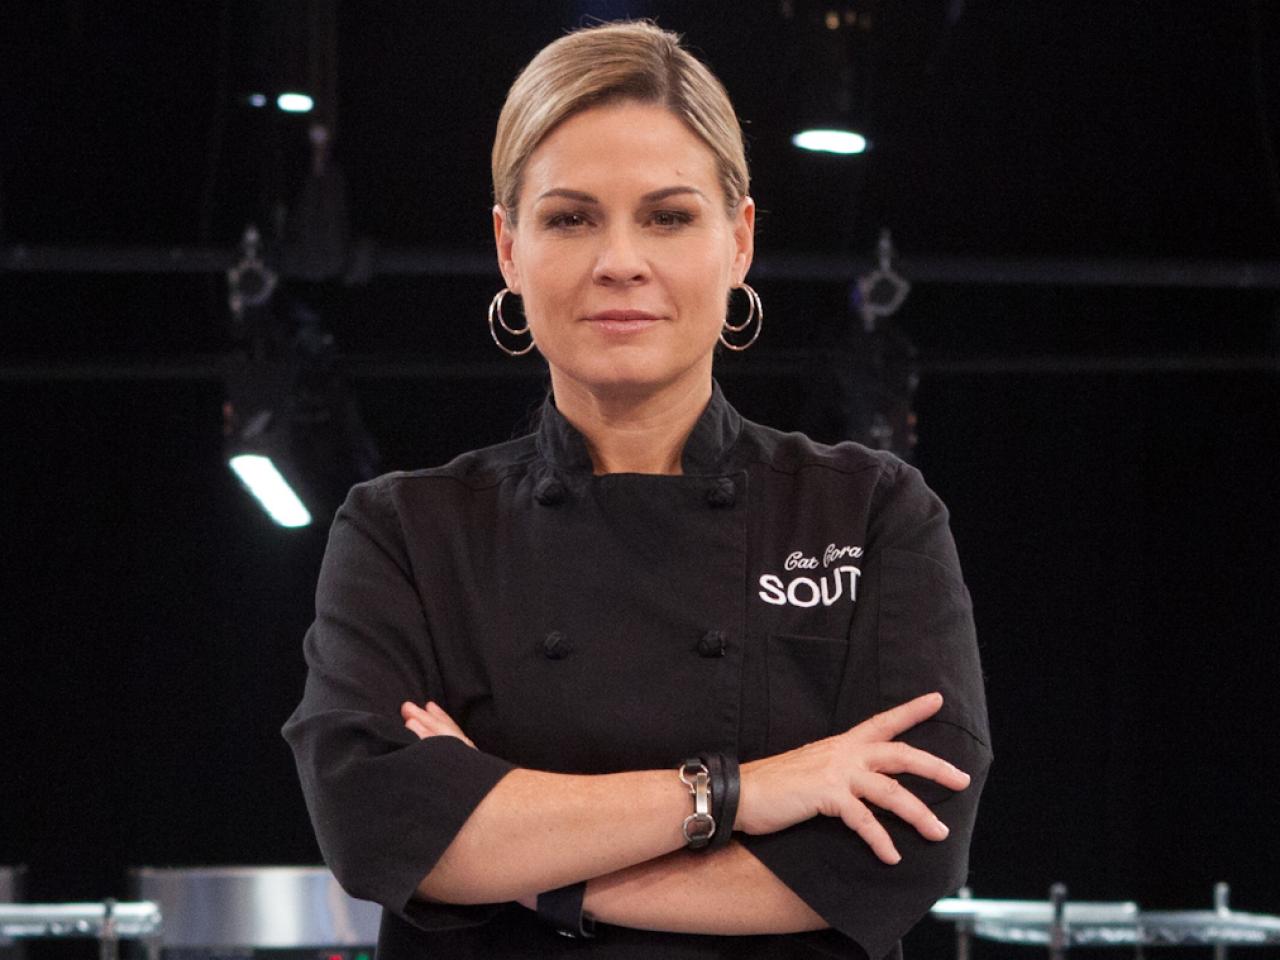 t's no surprise Cat Cora has become a world renowned chef. 